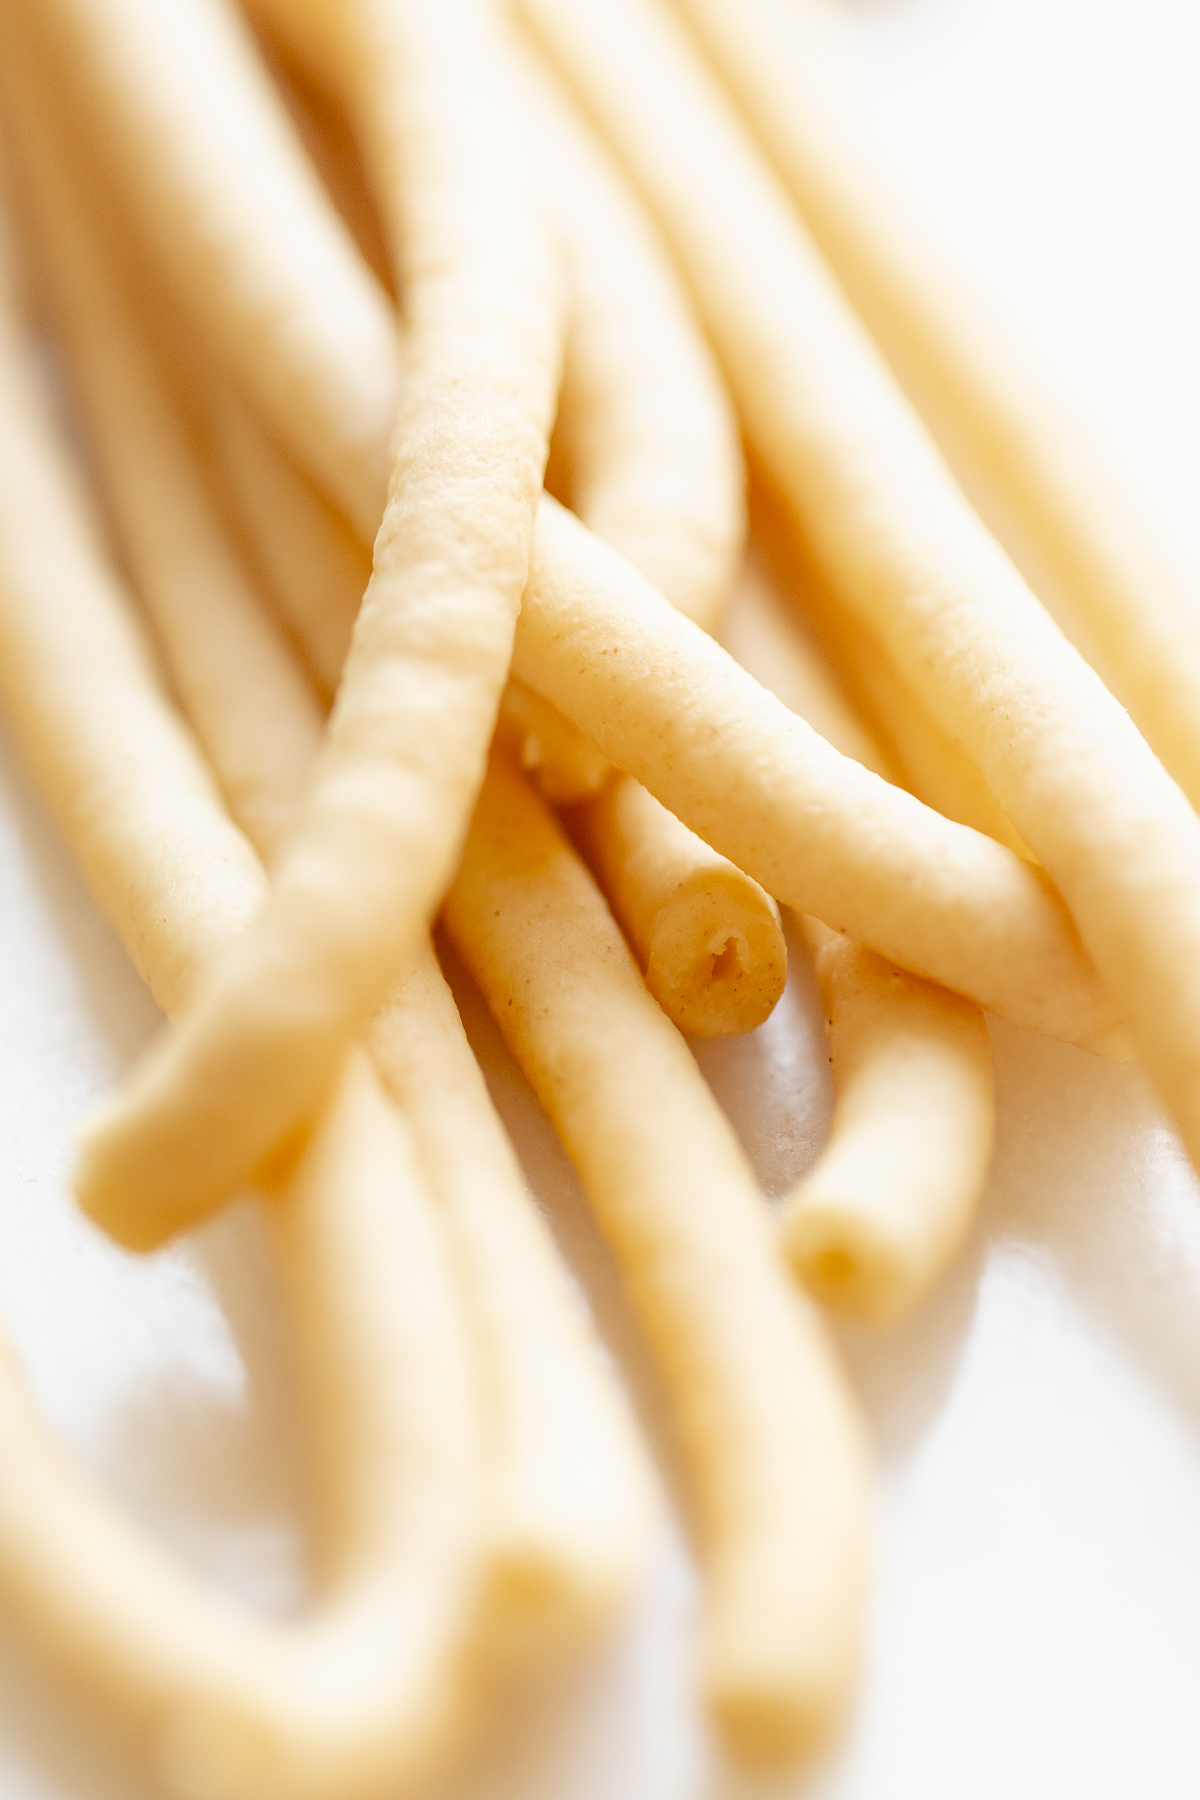 Close-up of bucatini noodles on a white background, highlighting their elongated shape and smooth texture.